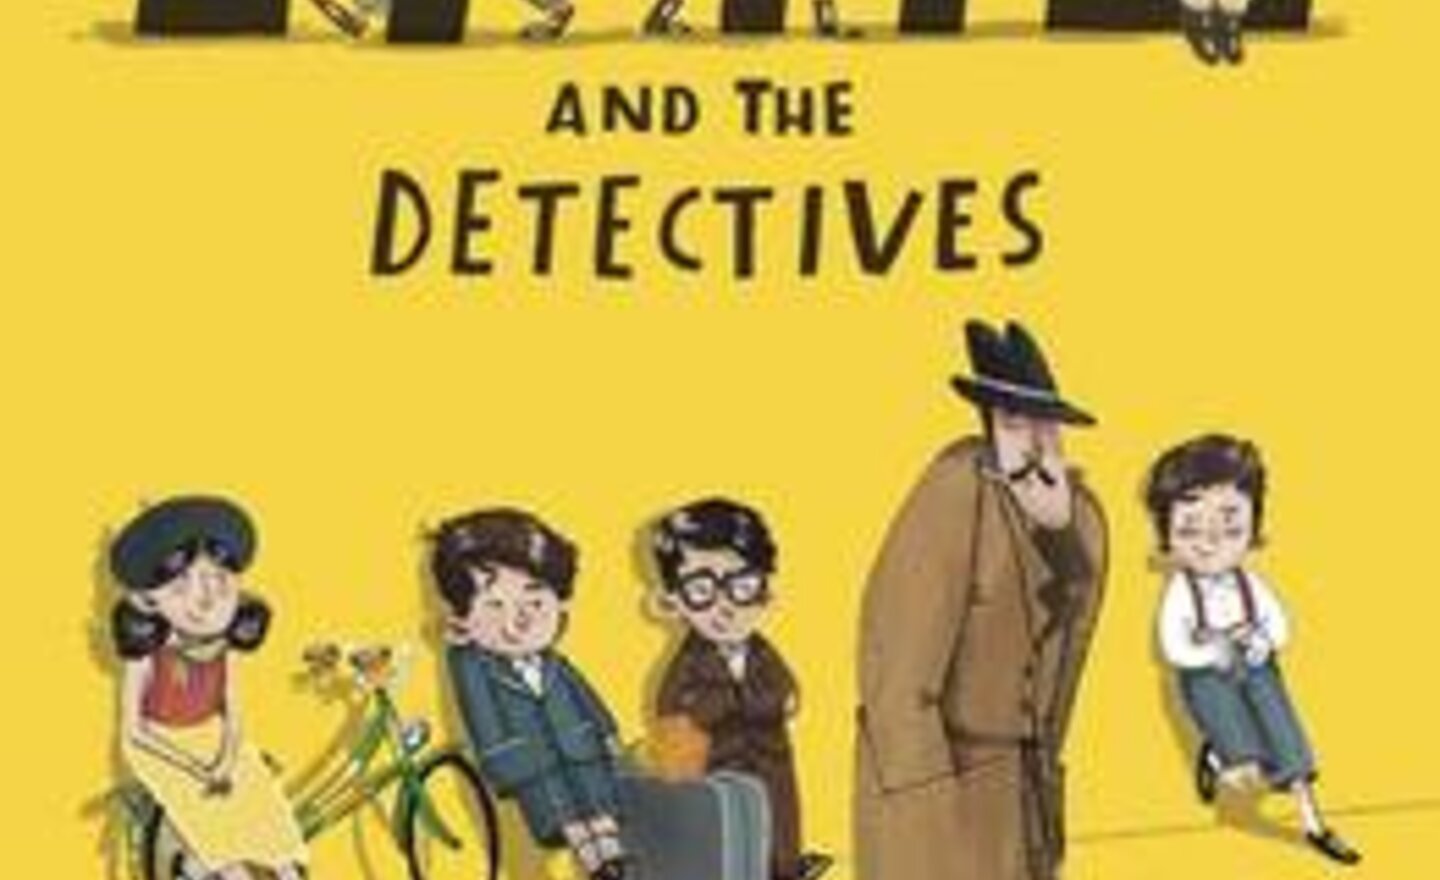 Image of Emil and The Detectives by Eric Kästner